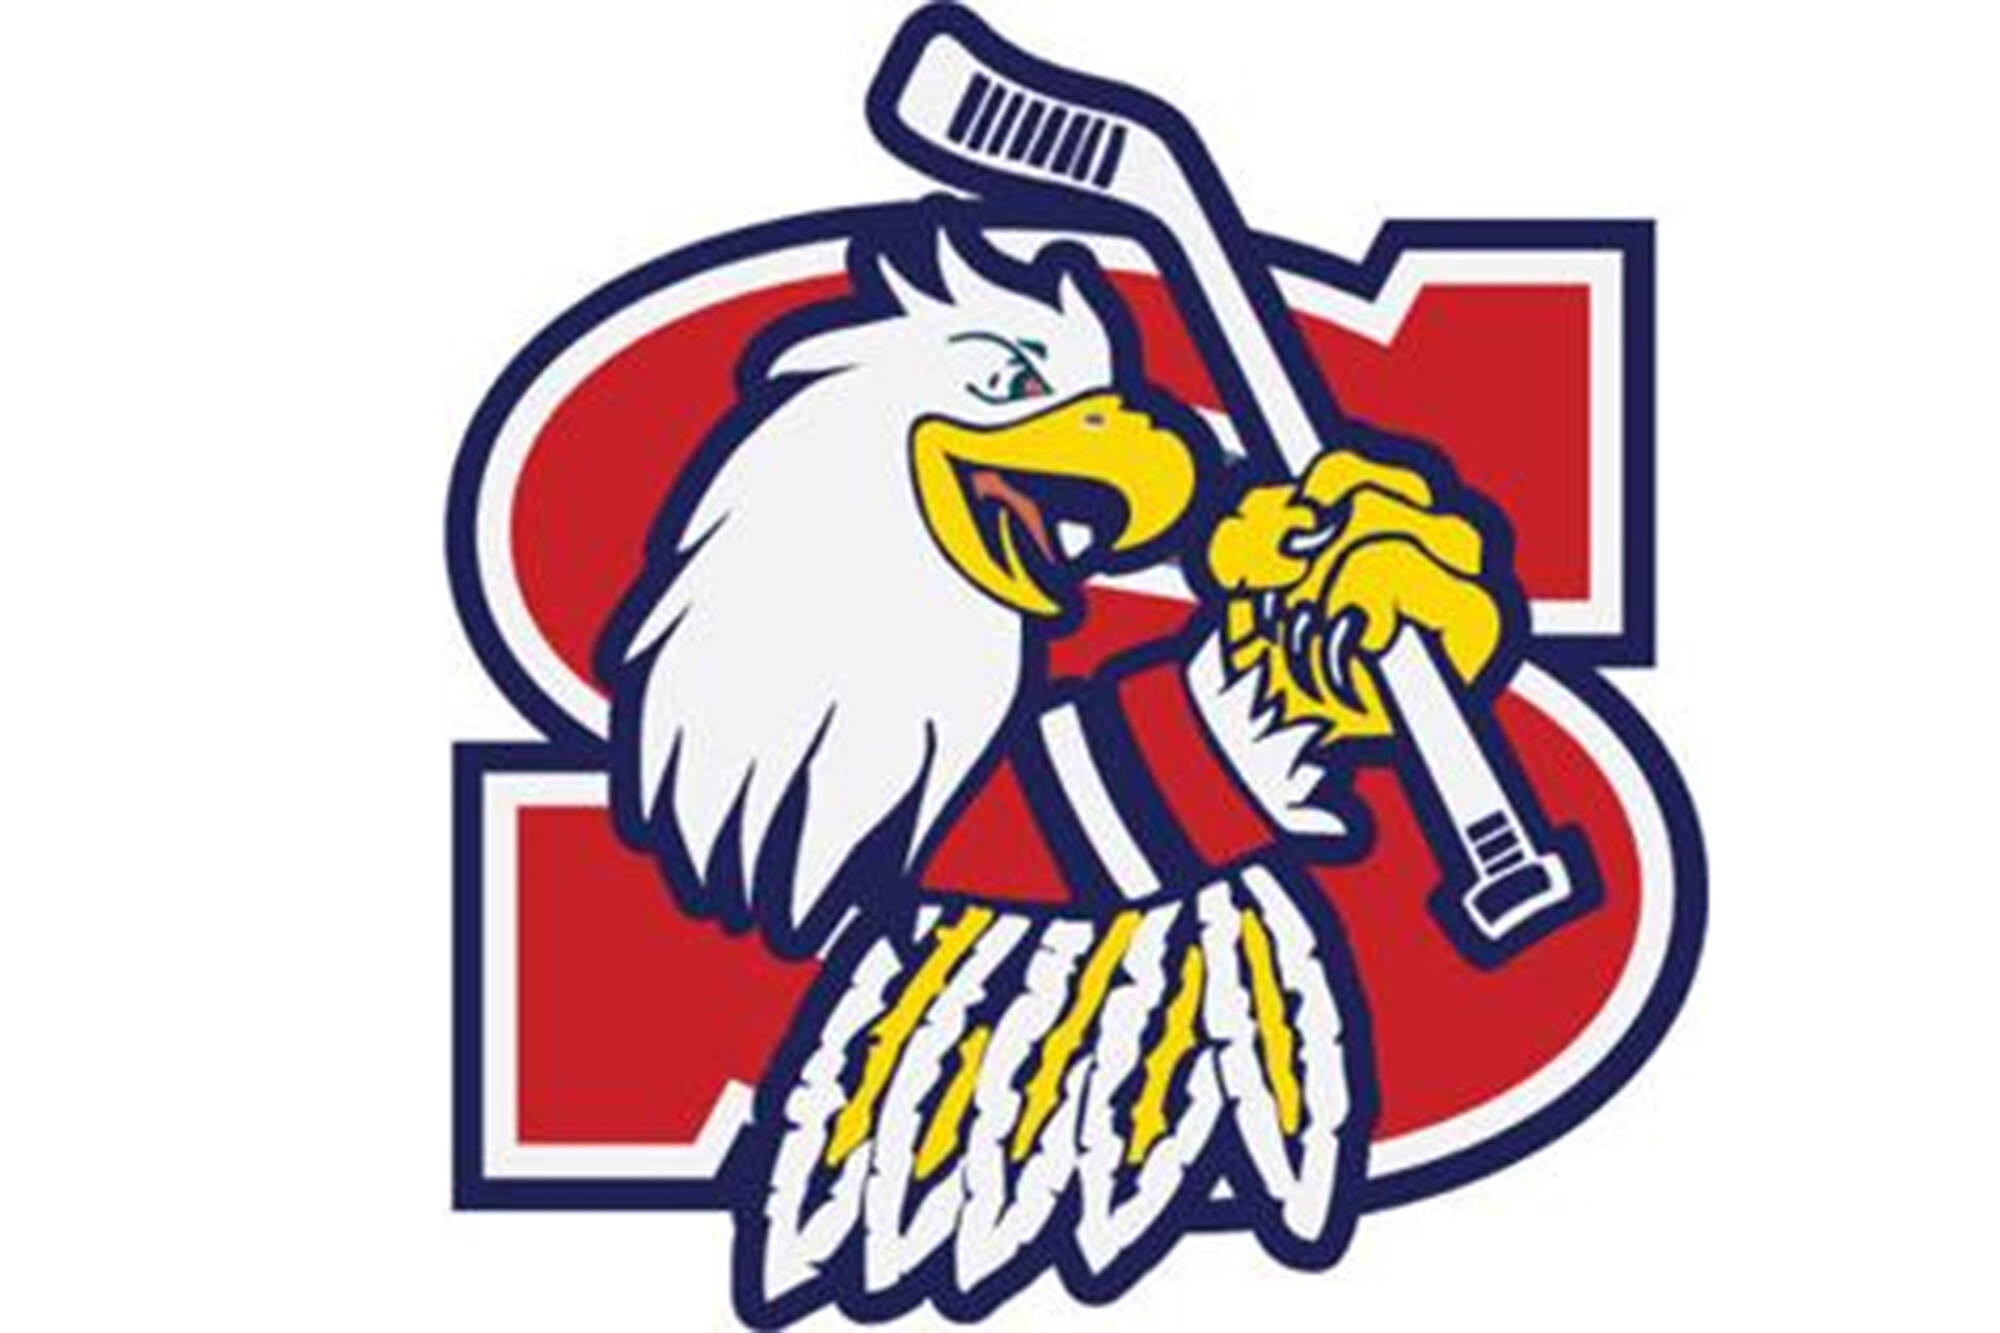 The Sicamous Eagles were sanctioned by the Kootenay International Junior Hockey League for violating the league’s COVID-19 vaccination policy on Dec. 10, 2021. (File Photo)